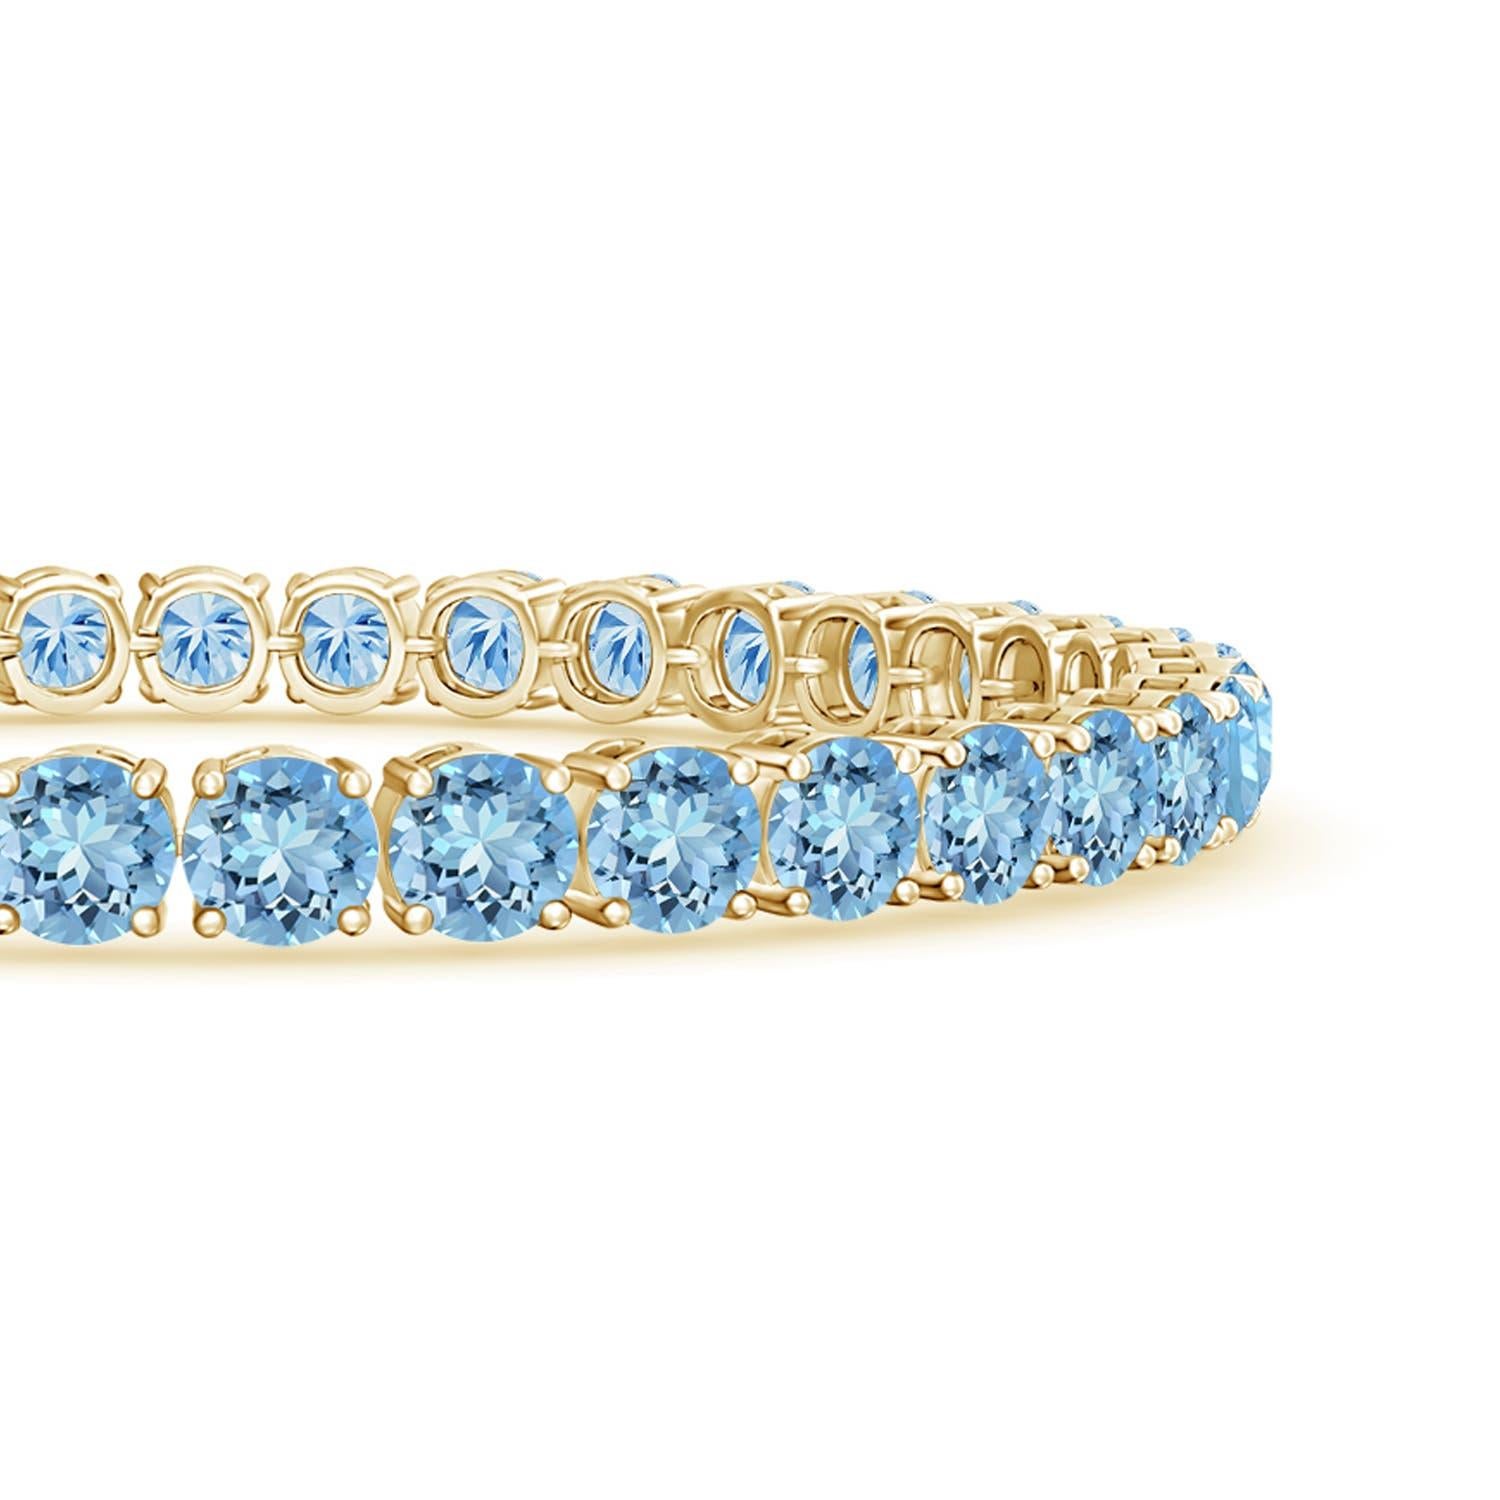 Simple yet so appealing, this tennis bracelet in 14k white gold is effortlessly elegant. The alternated round diamonds and icy blue aquamarines are secured in bezel settings.